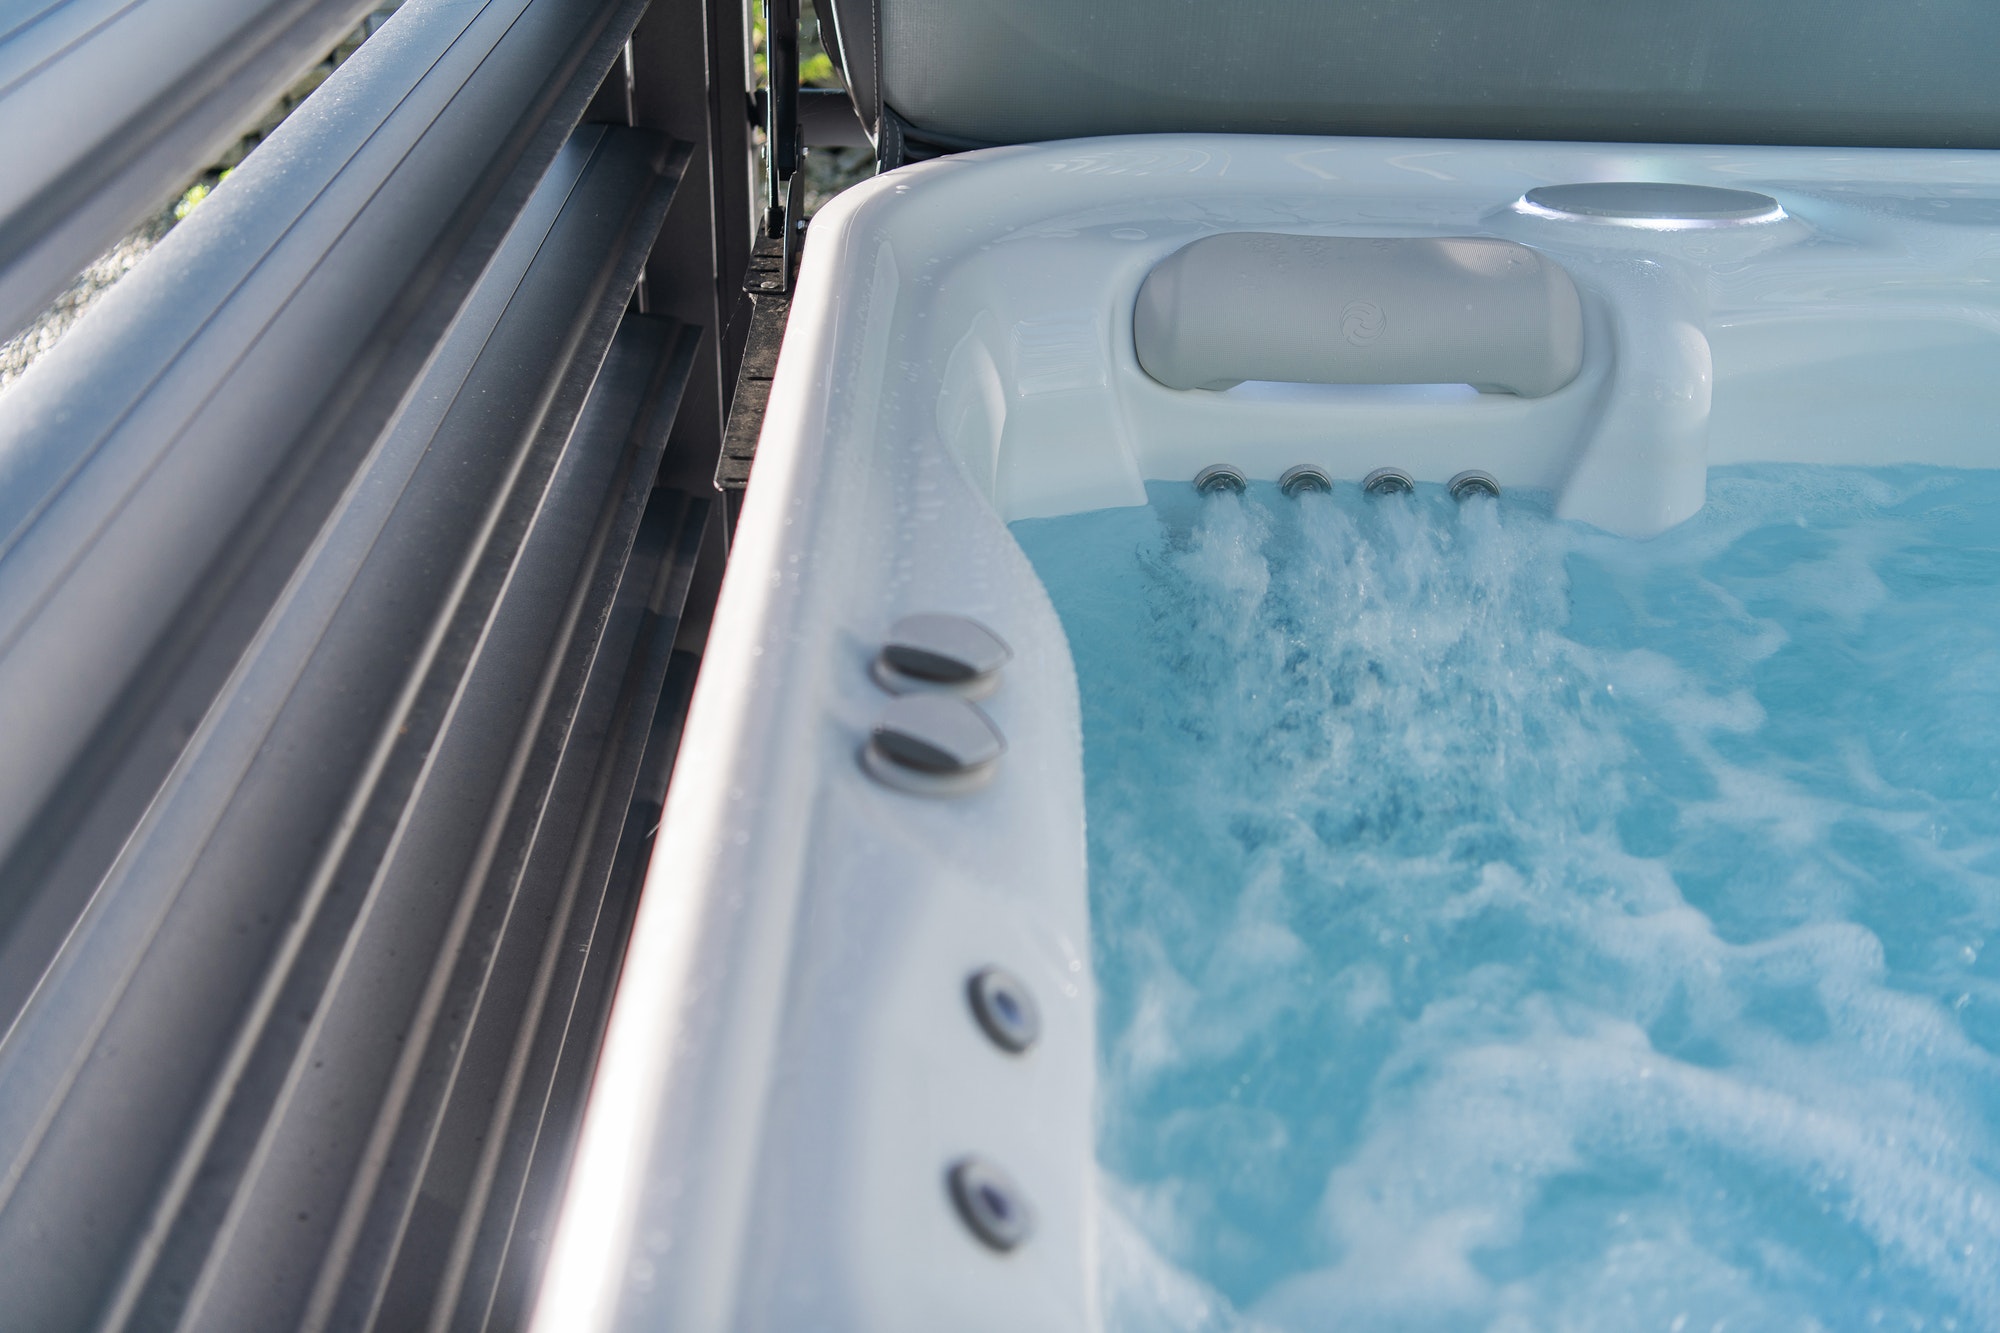 How To Fix A Leaking Hot Tub Jet